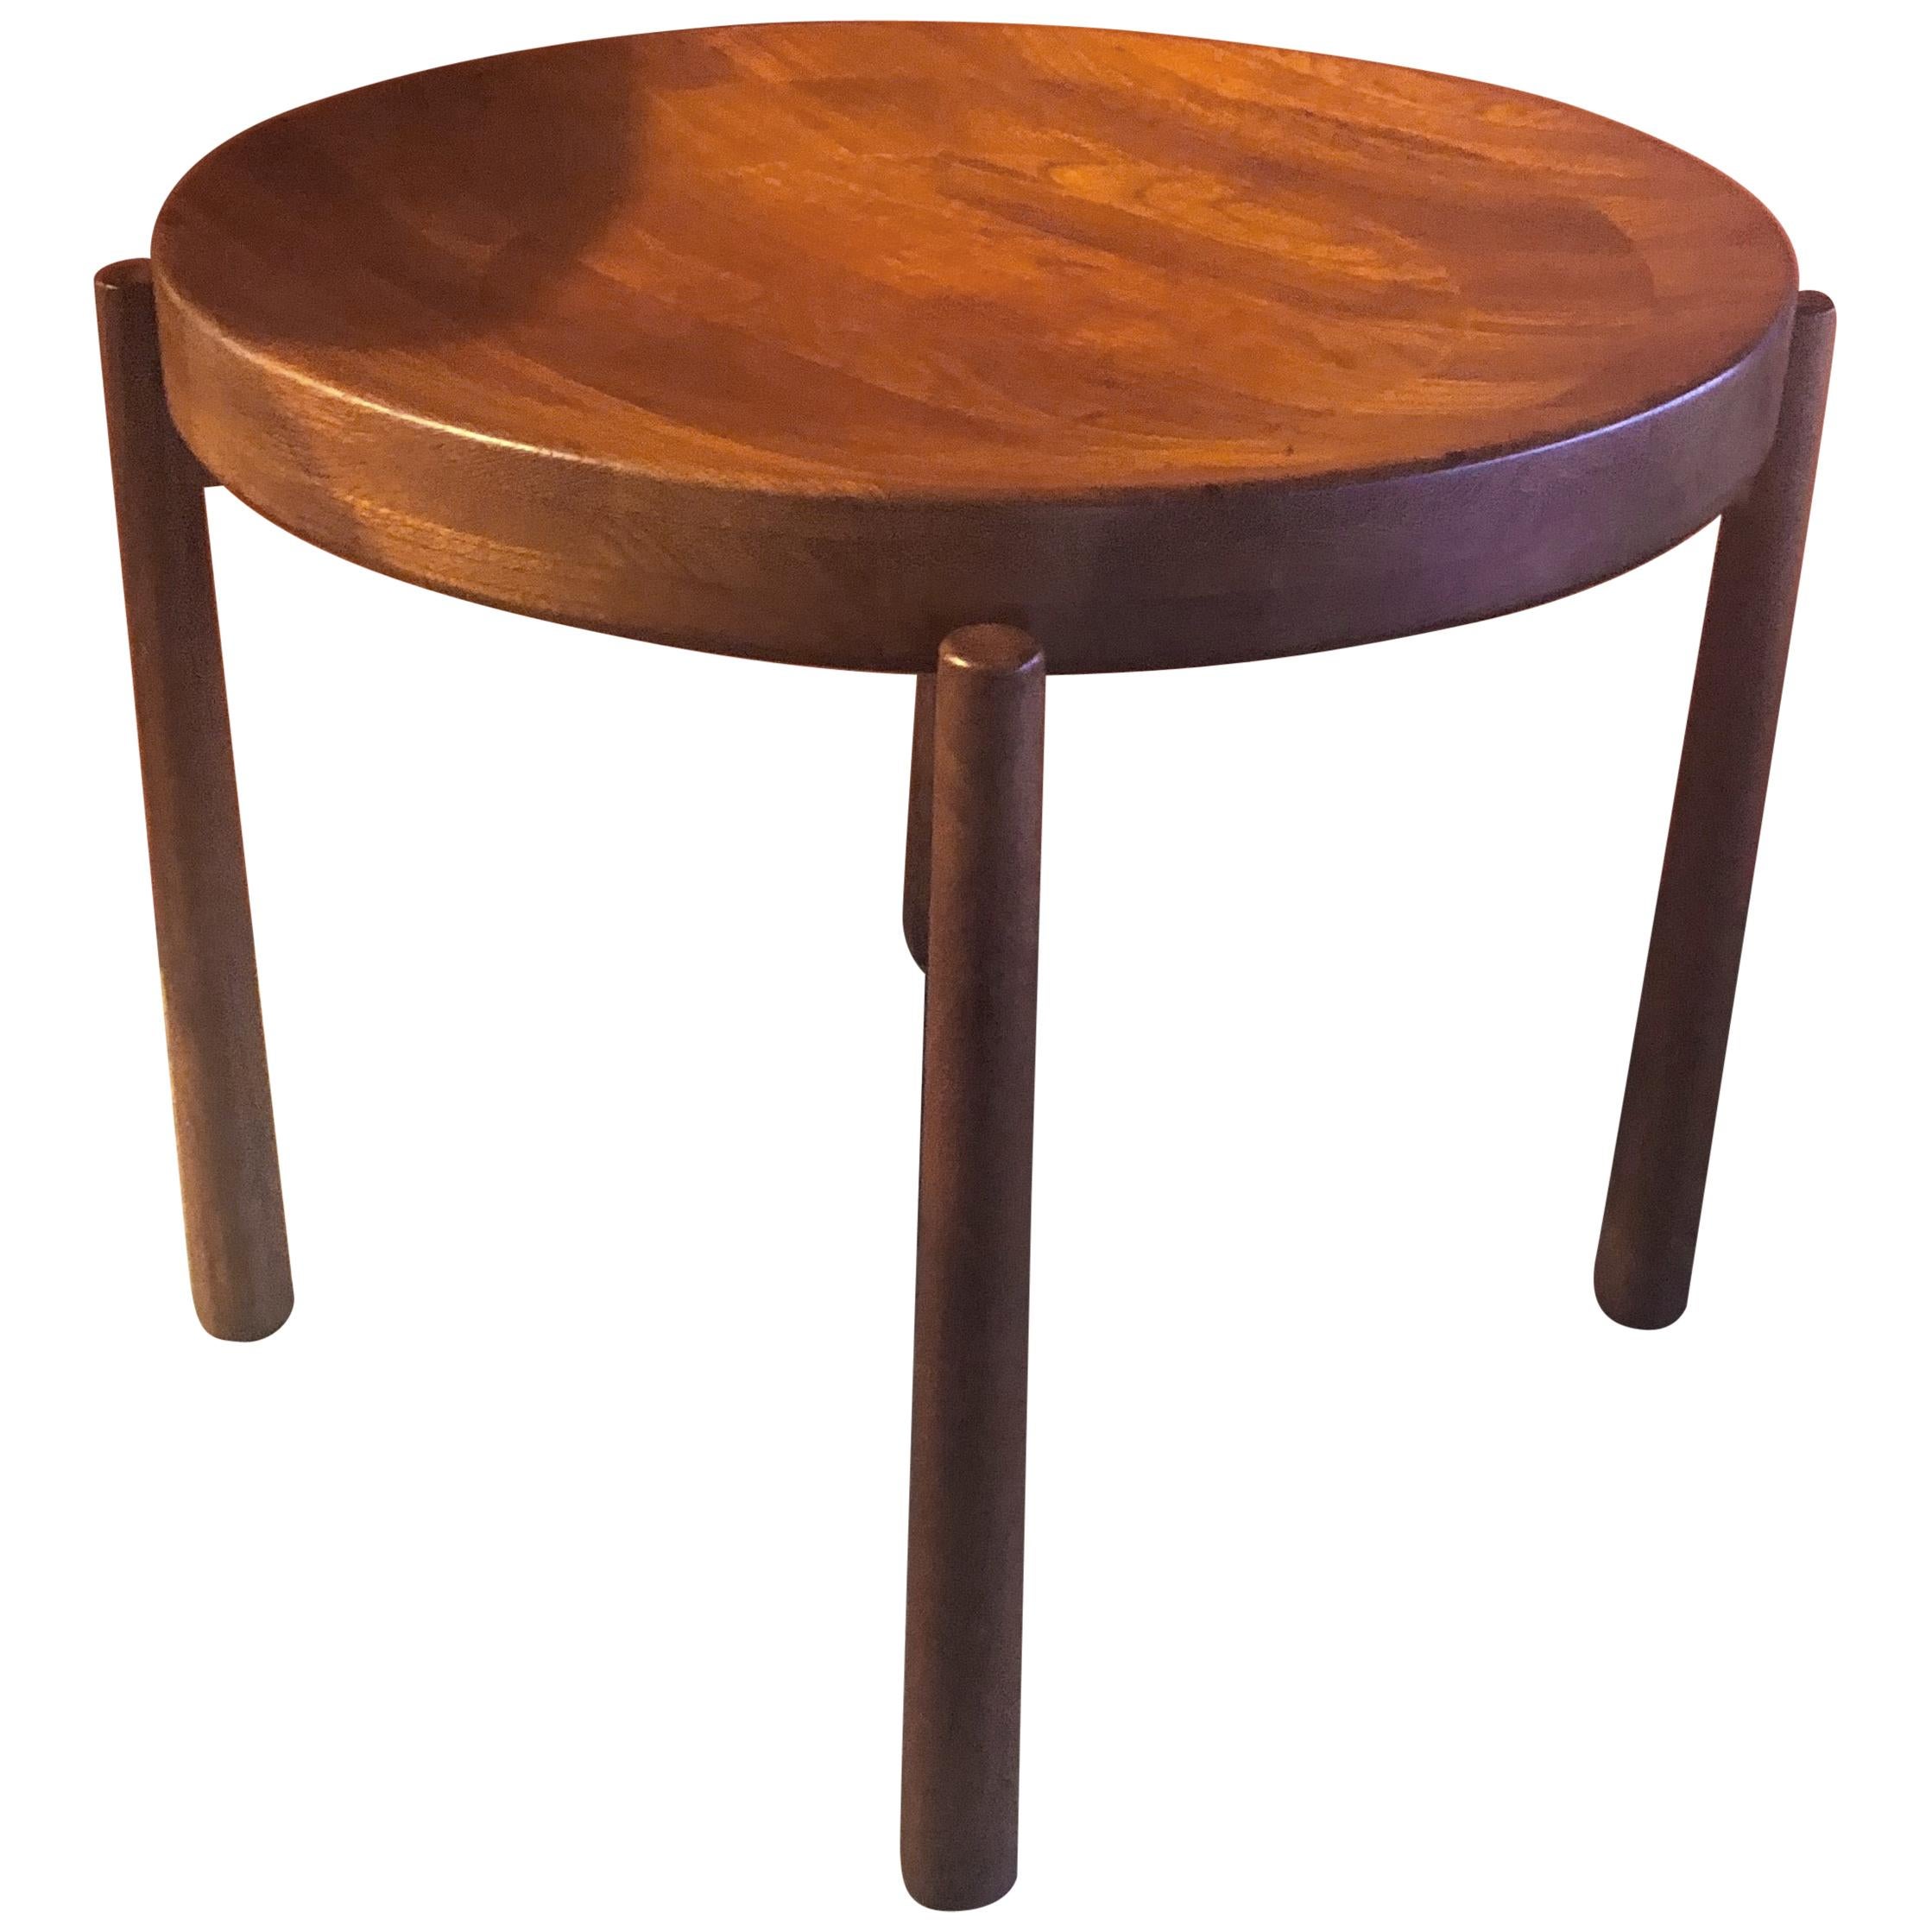 Side Table or Fruit Bowl Attributed to Jens Harald Quistgaard for DUX of Sweden For Sale